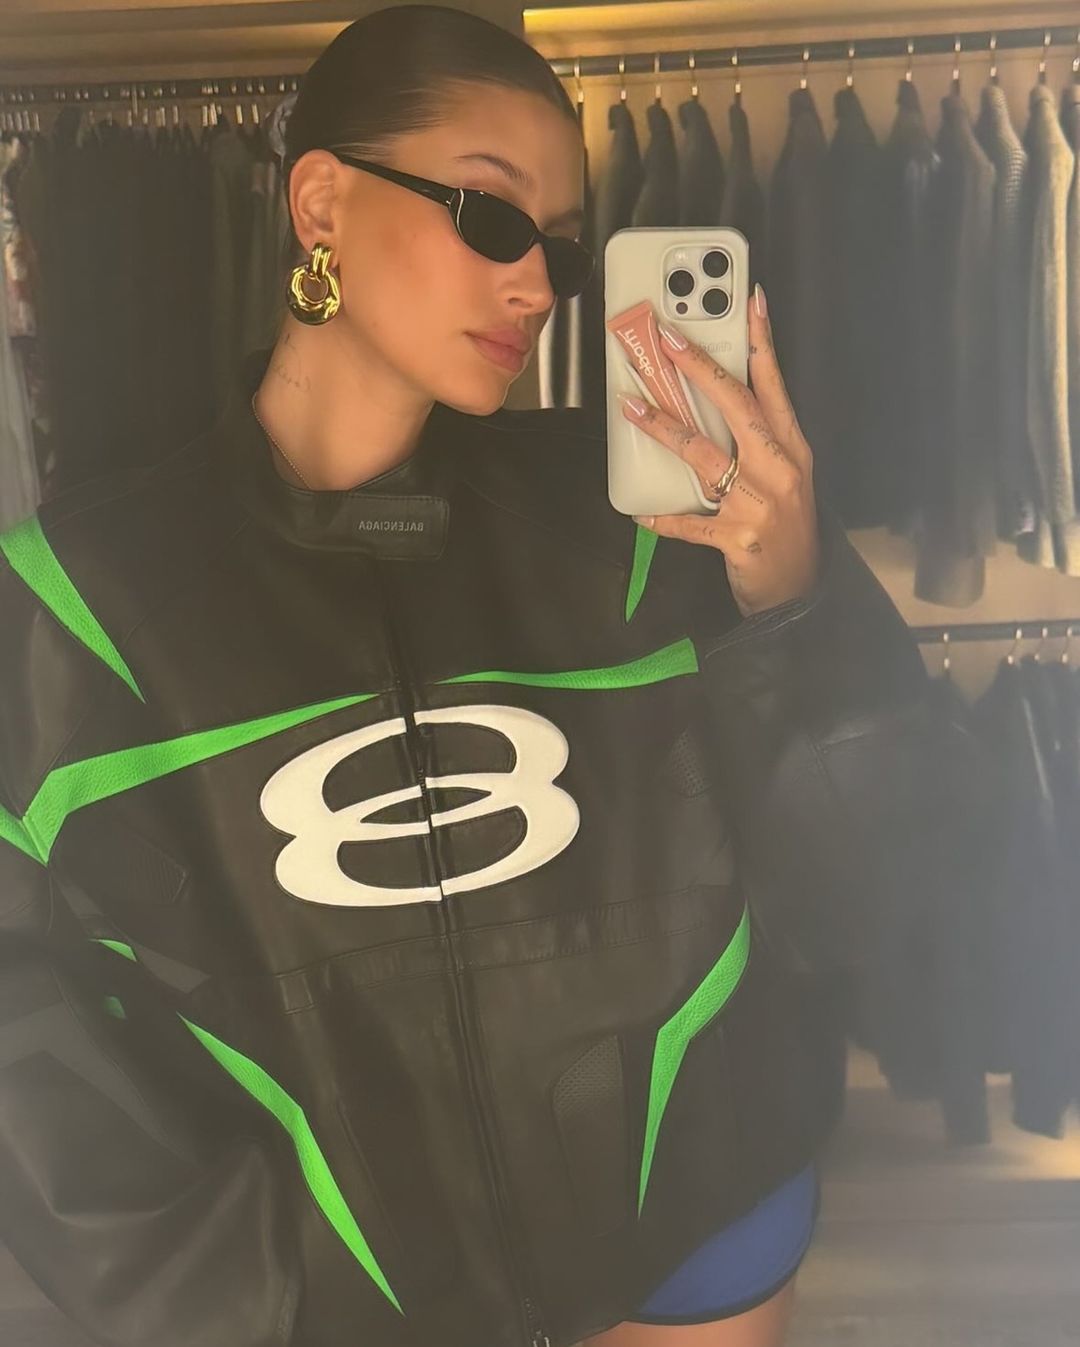 Hailey recently sparked pregnancy speculation by following a pregnancy-based creator on TikTok and posting in oversized clothing